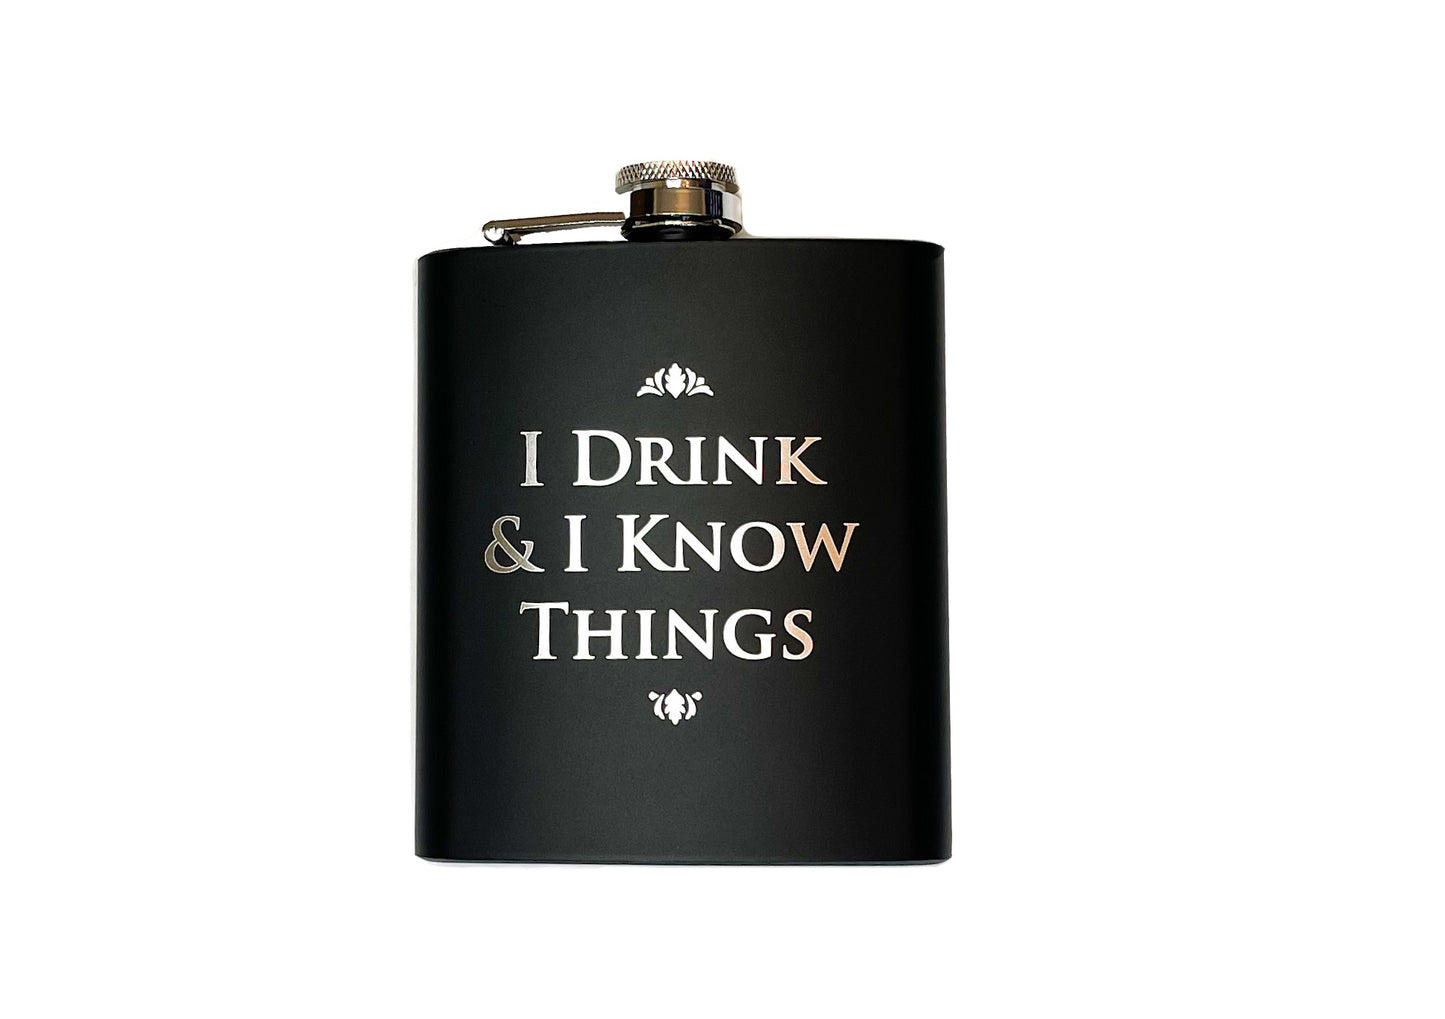 Game of Thrones I Drink & I Know Things Metal Hip Flask